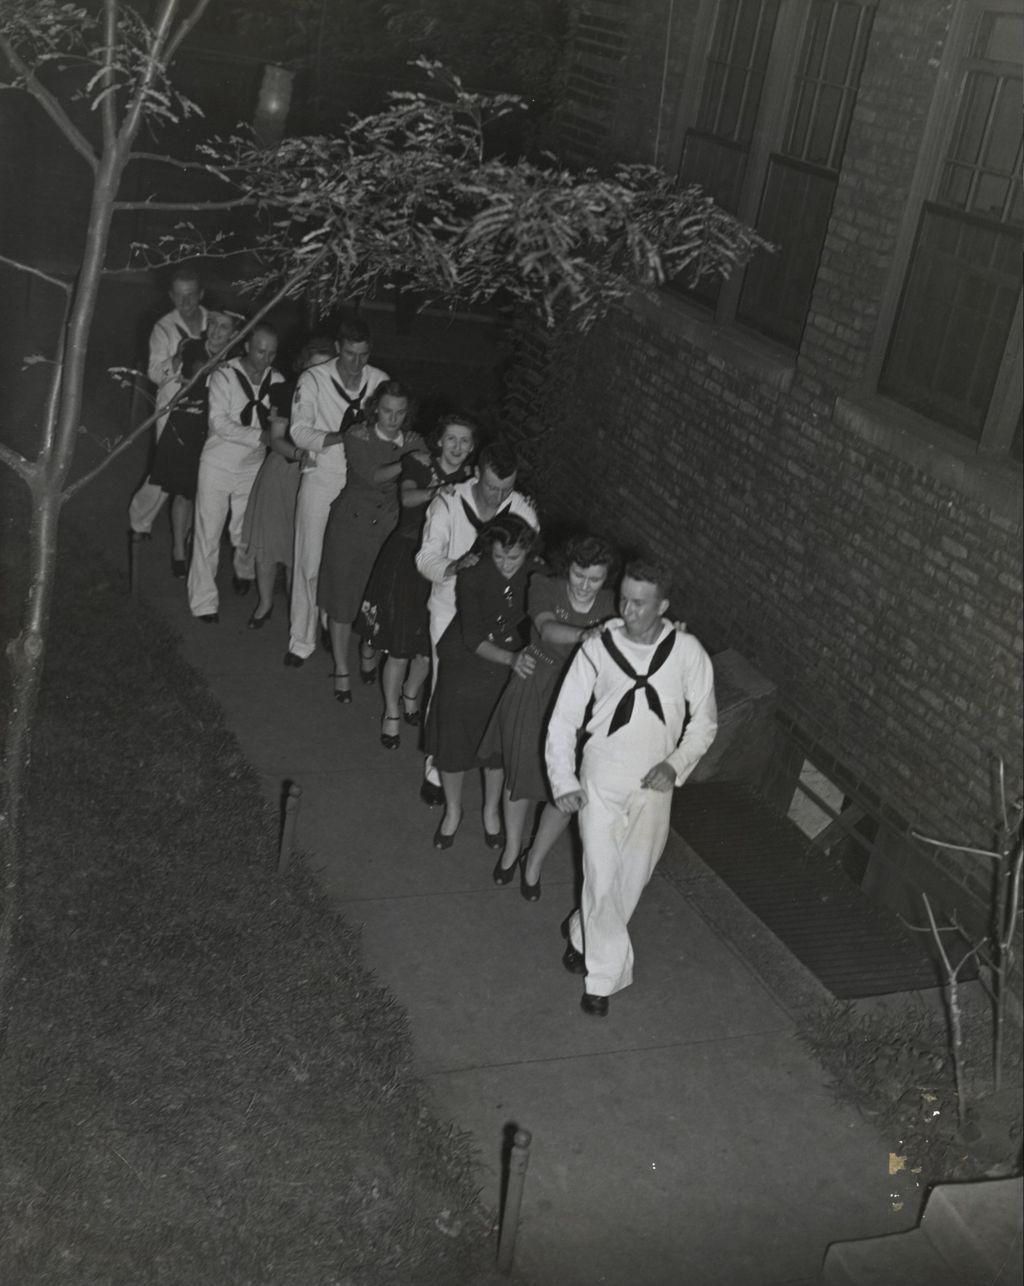 Miniature of United States Navy sailors in a conga line with several women in the Hull-House Courtyard during an "Entertaining the Navy" event